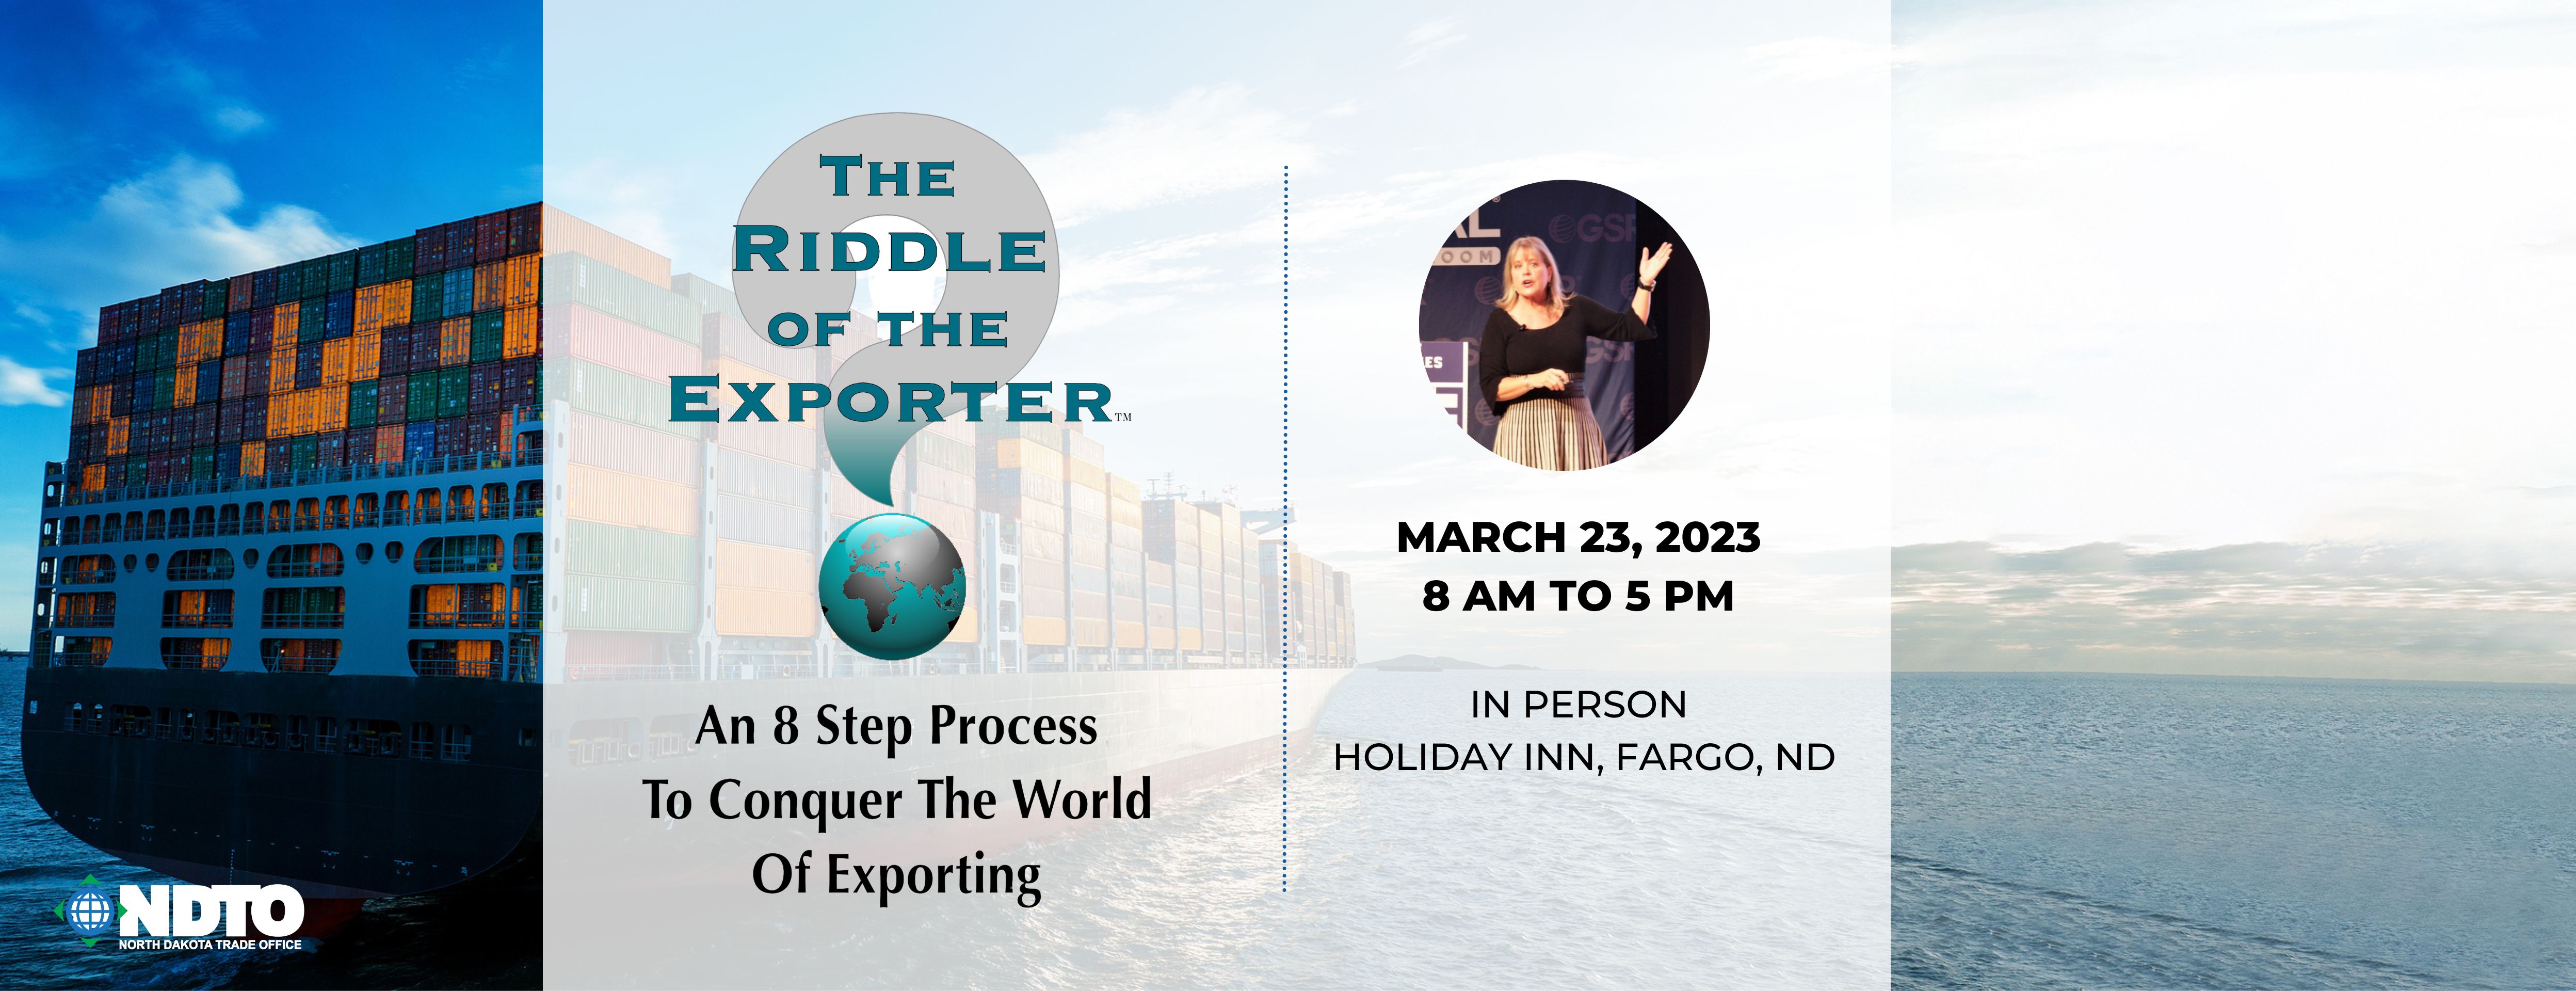 The Riddle of the Exporter Live in Fargo